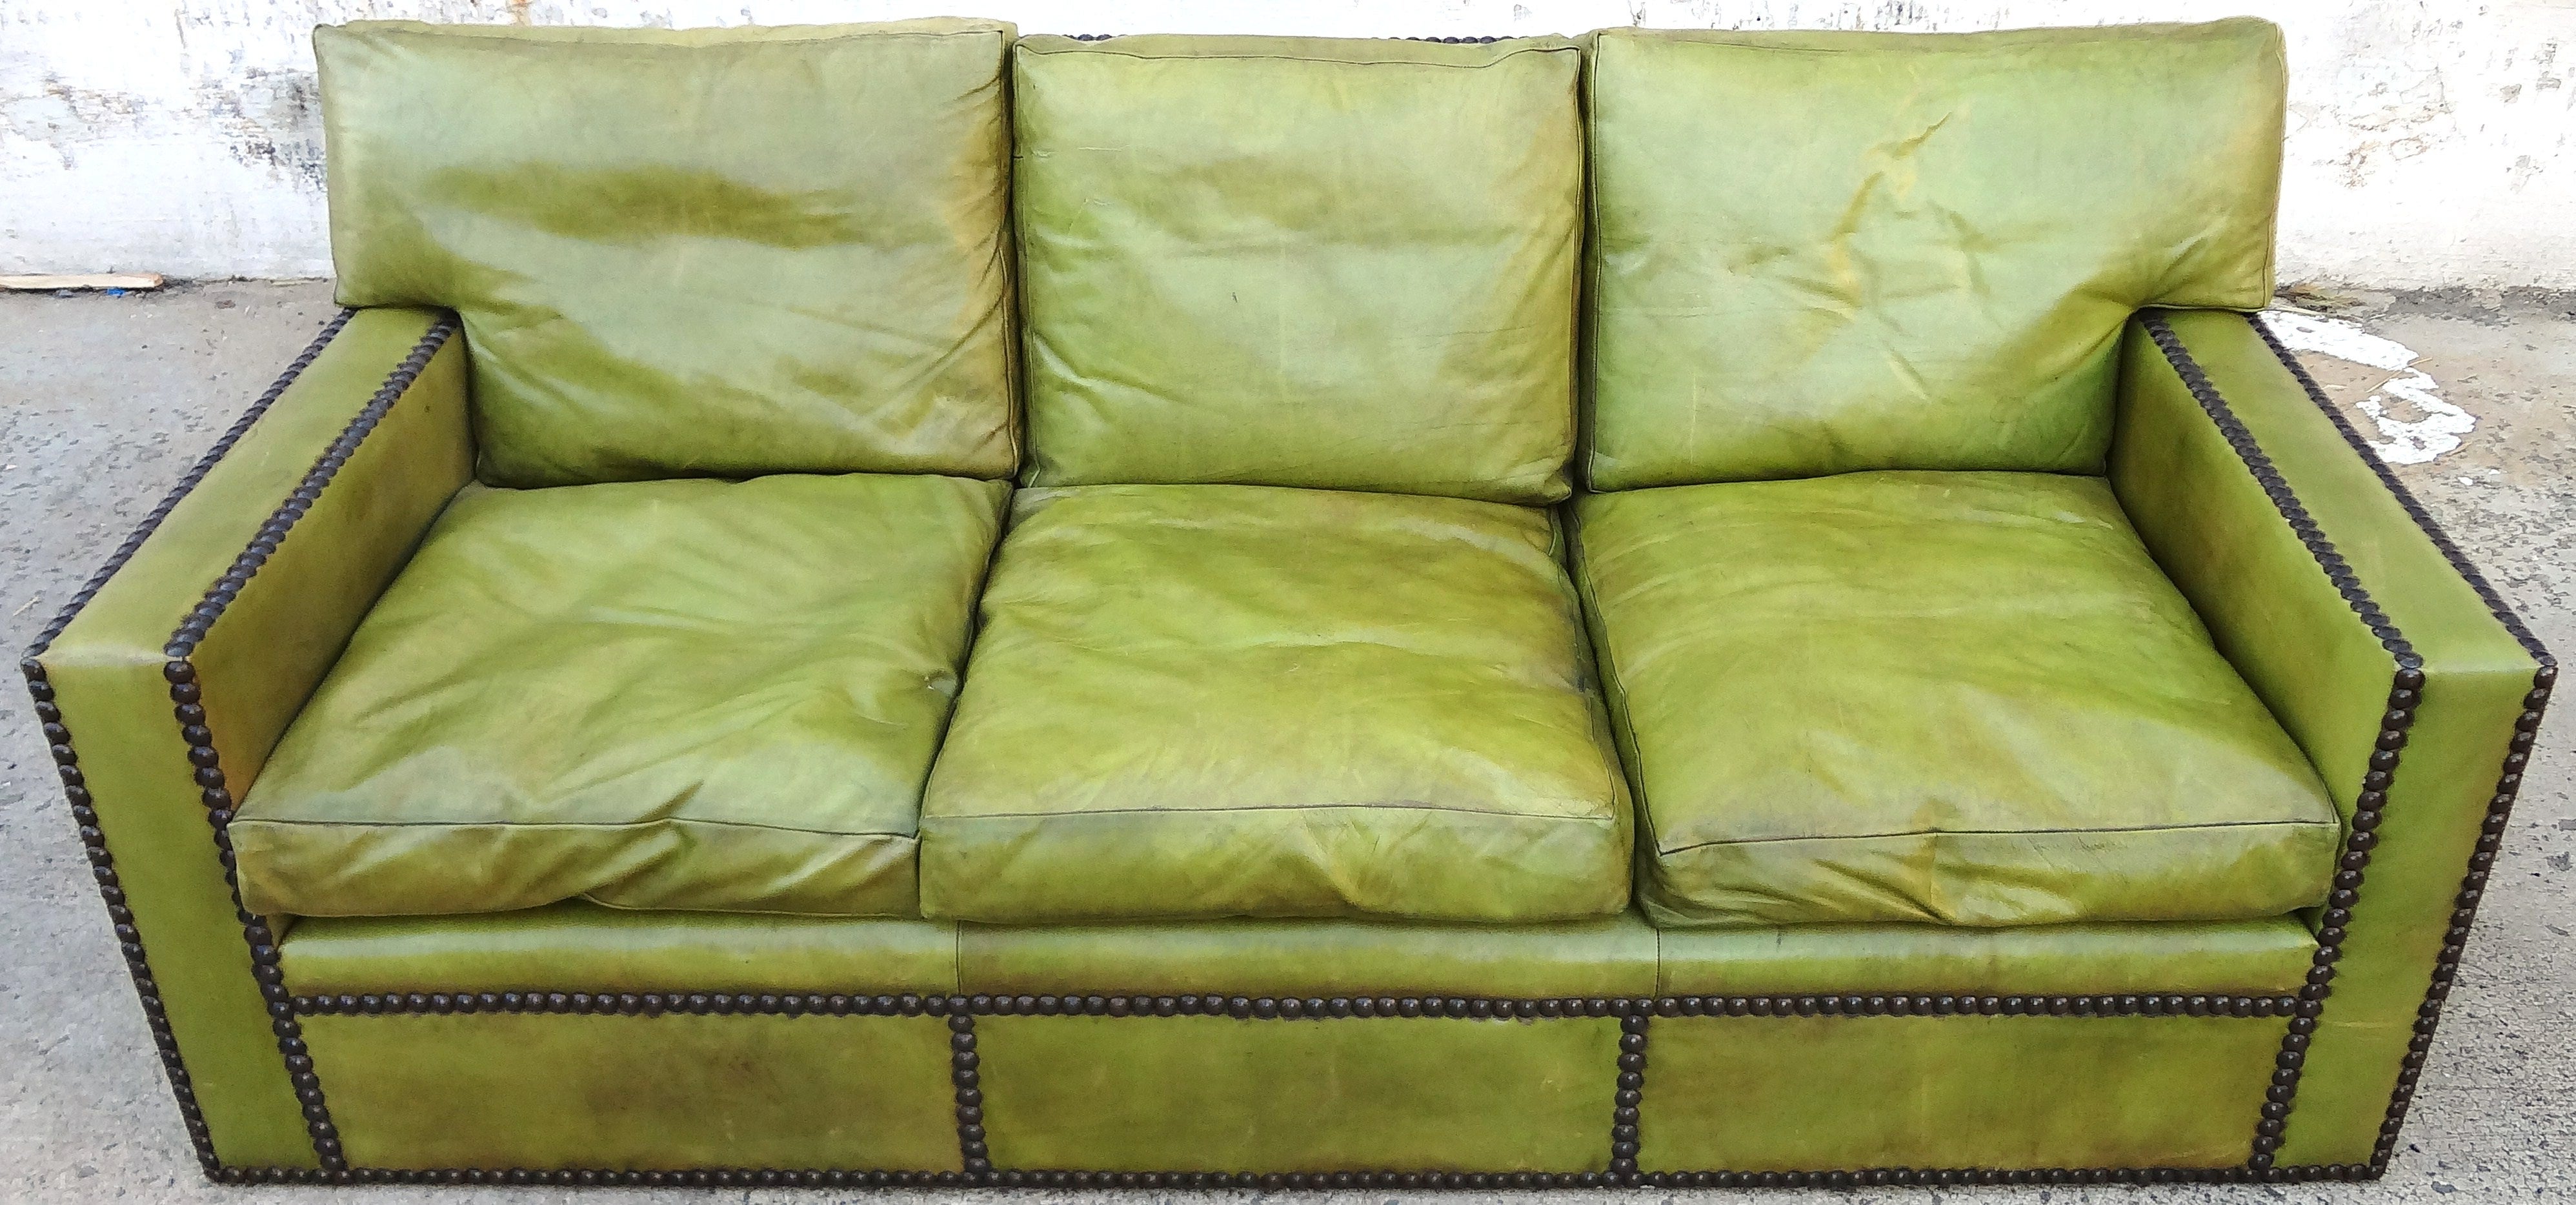 Fabulous 1950s French Leather Sofa For Sale